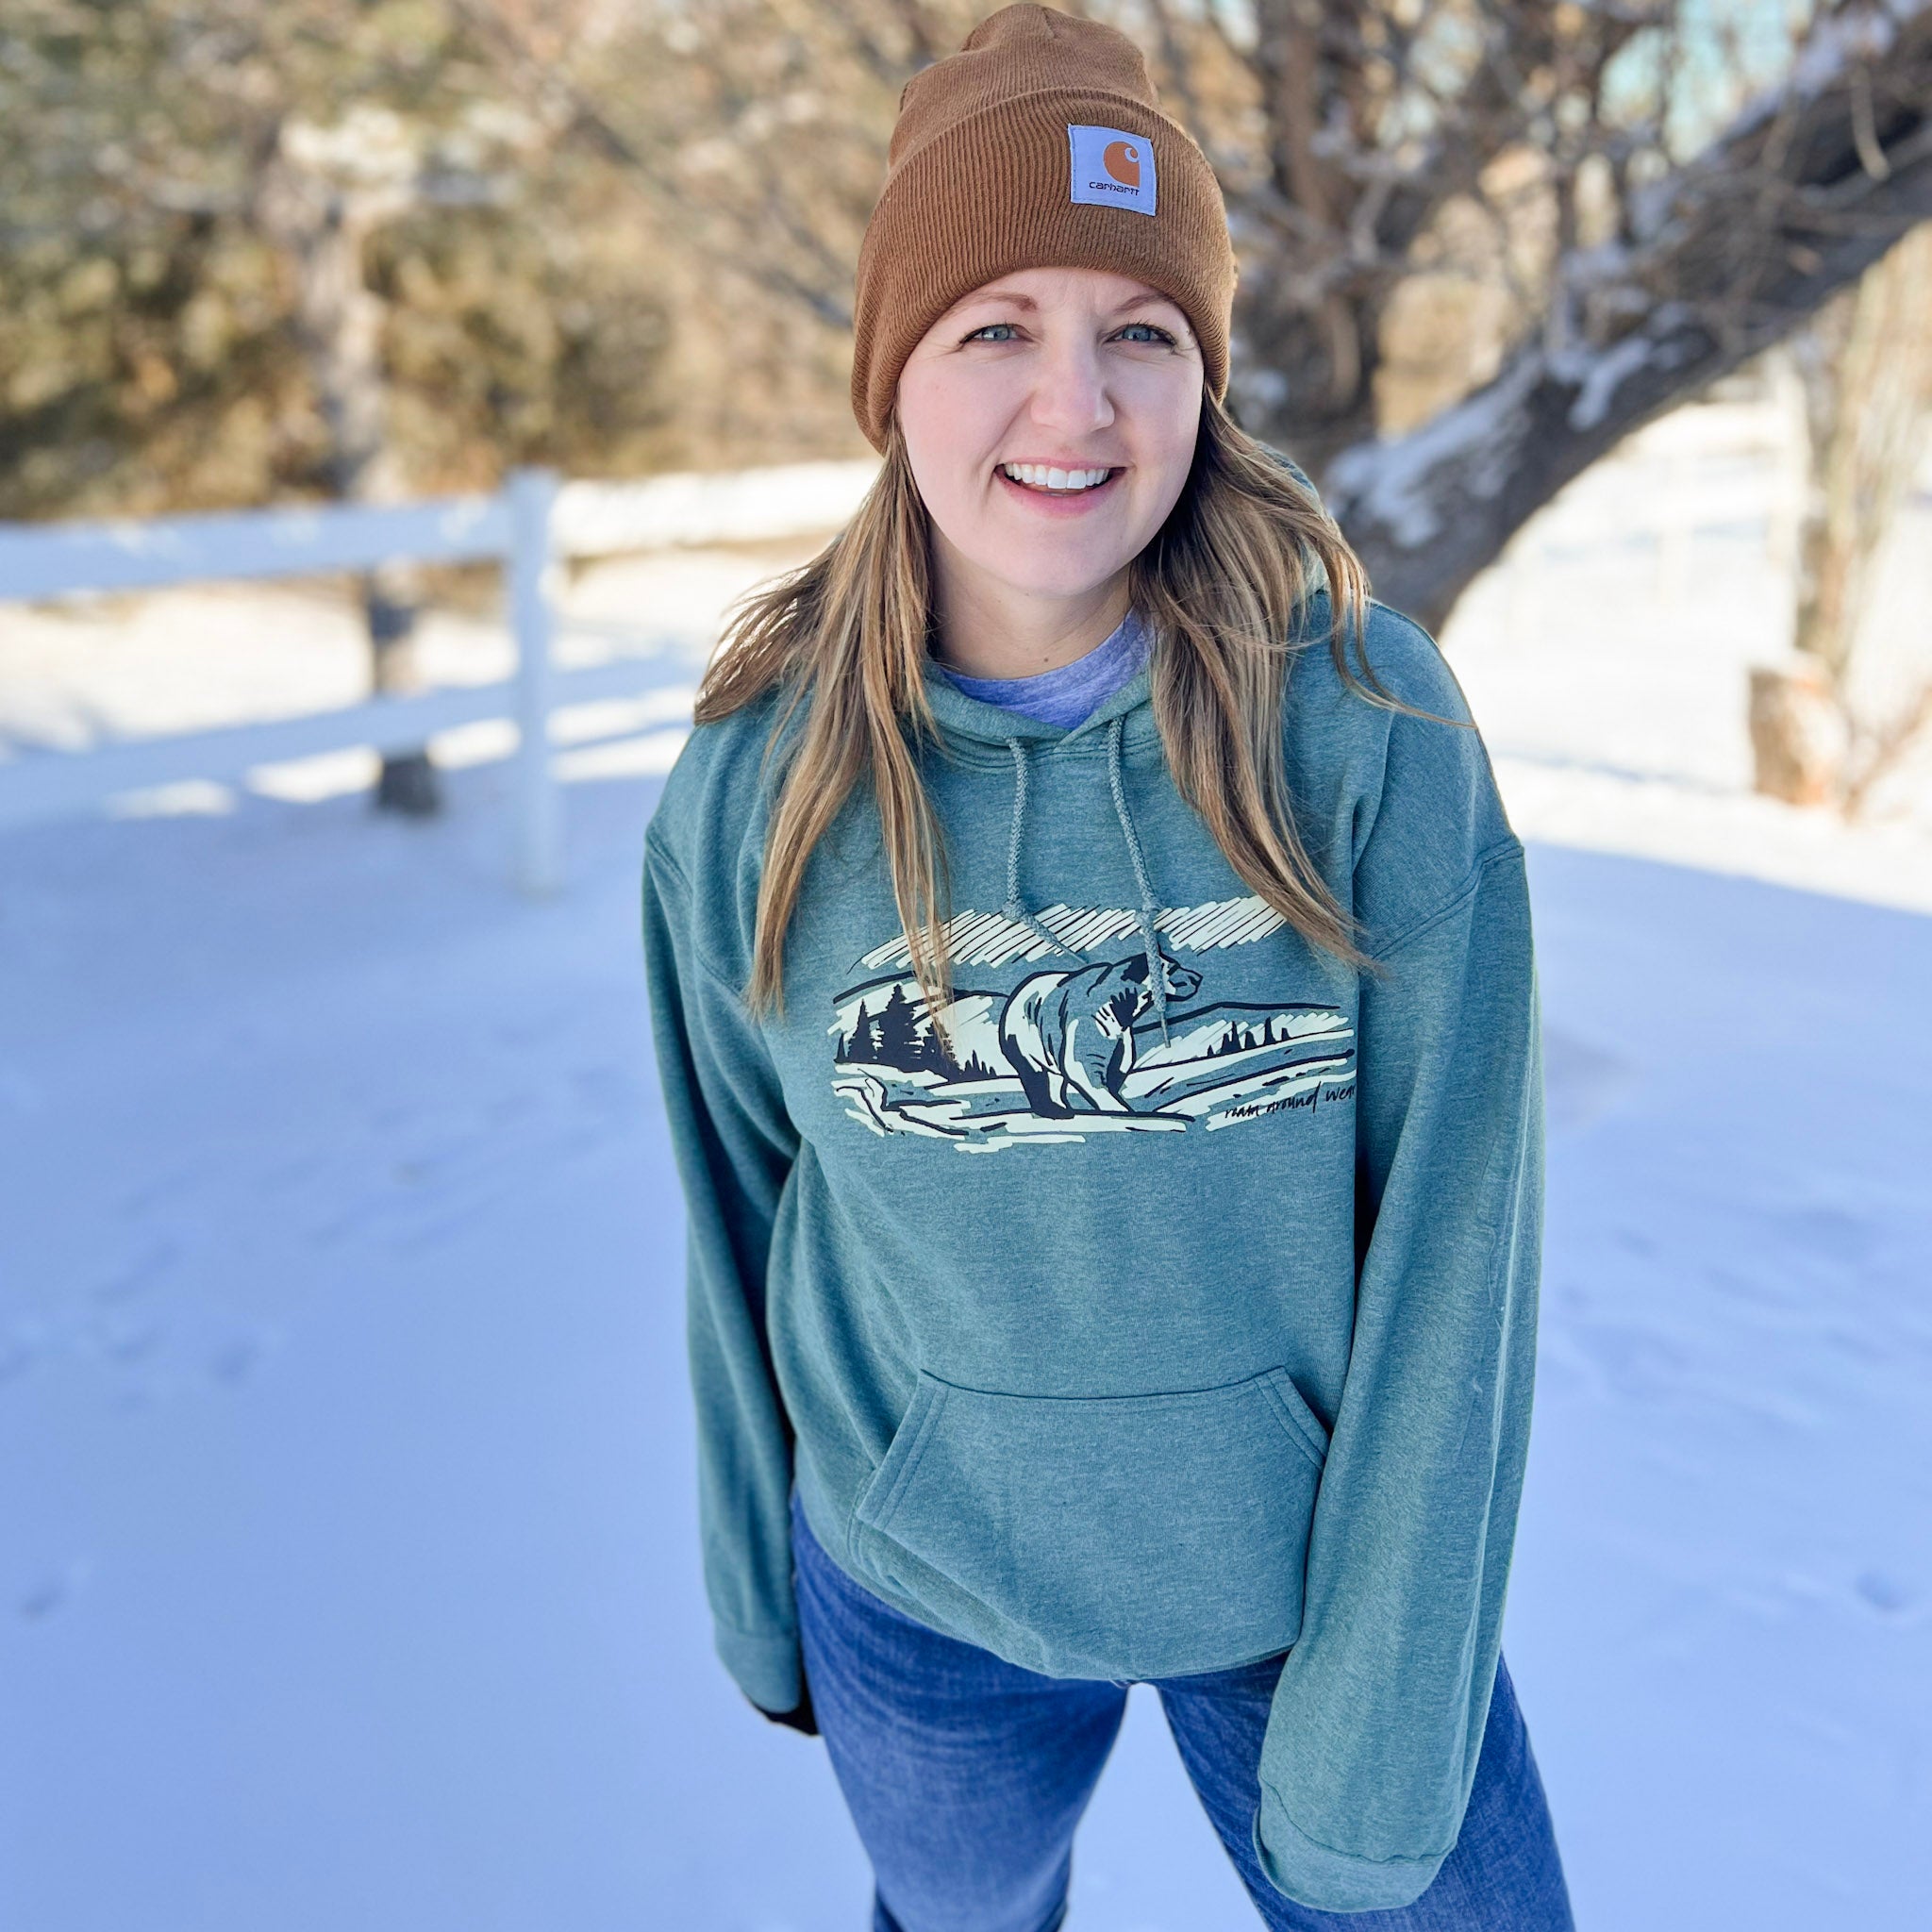 Bear Hoodie. Outdoor sweatshirt. Wyoming sweatshirt. Montana sweatshirt. Green sweatshirt. Roam Around Wear is a Wyoming t-shirt company based out of Gillette, Wyoming